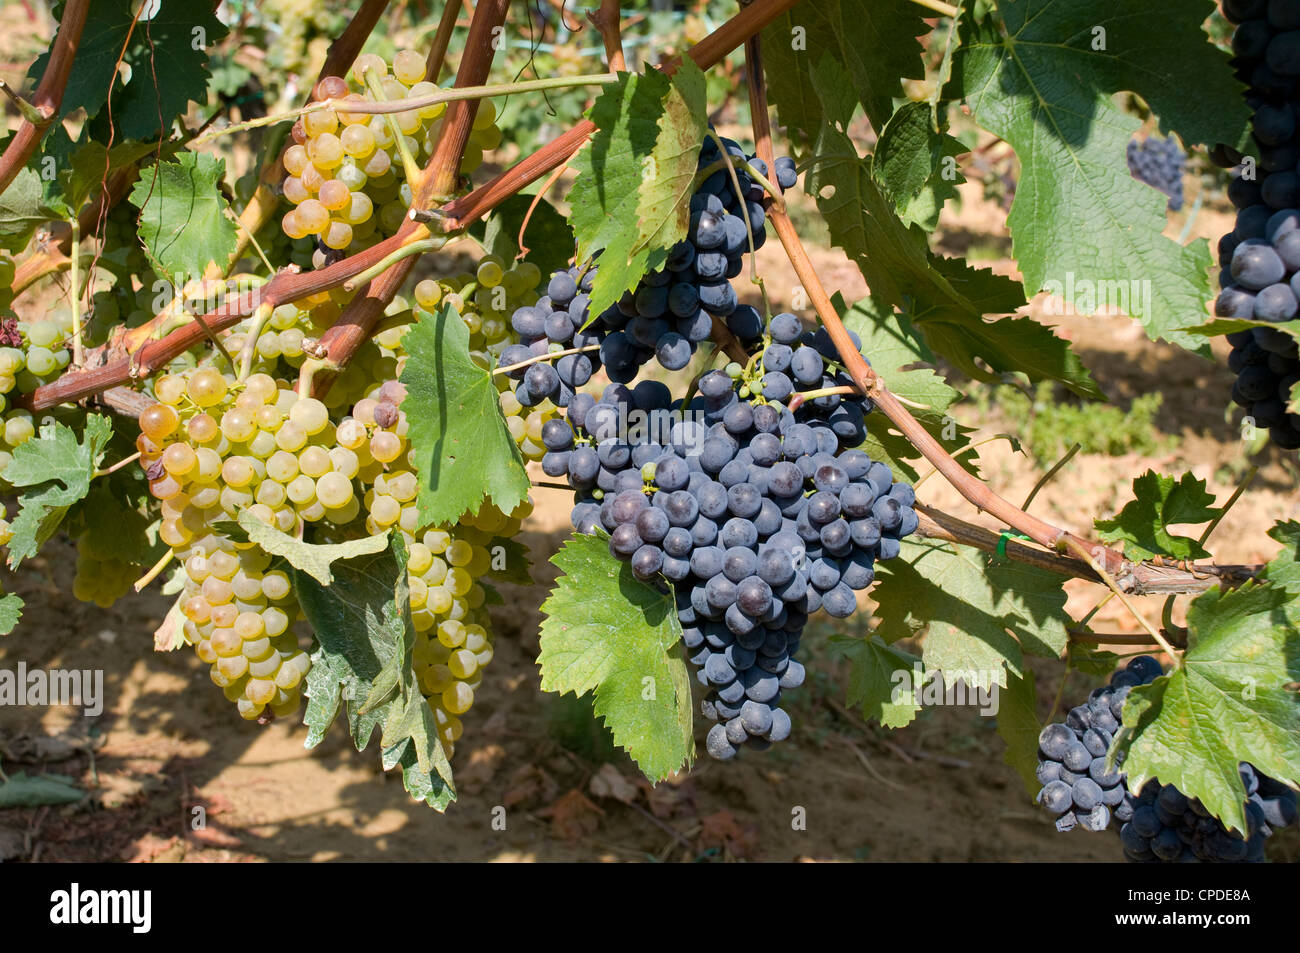 Red and white grapes growing in a vineyard near Montalcino, Tuscany, Italy, Europe Stock Photo